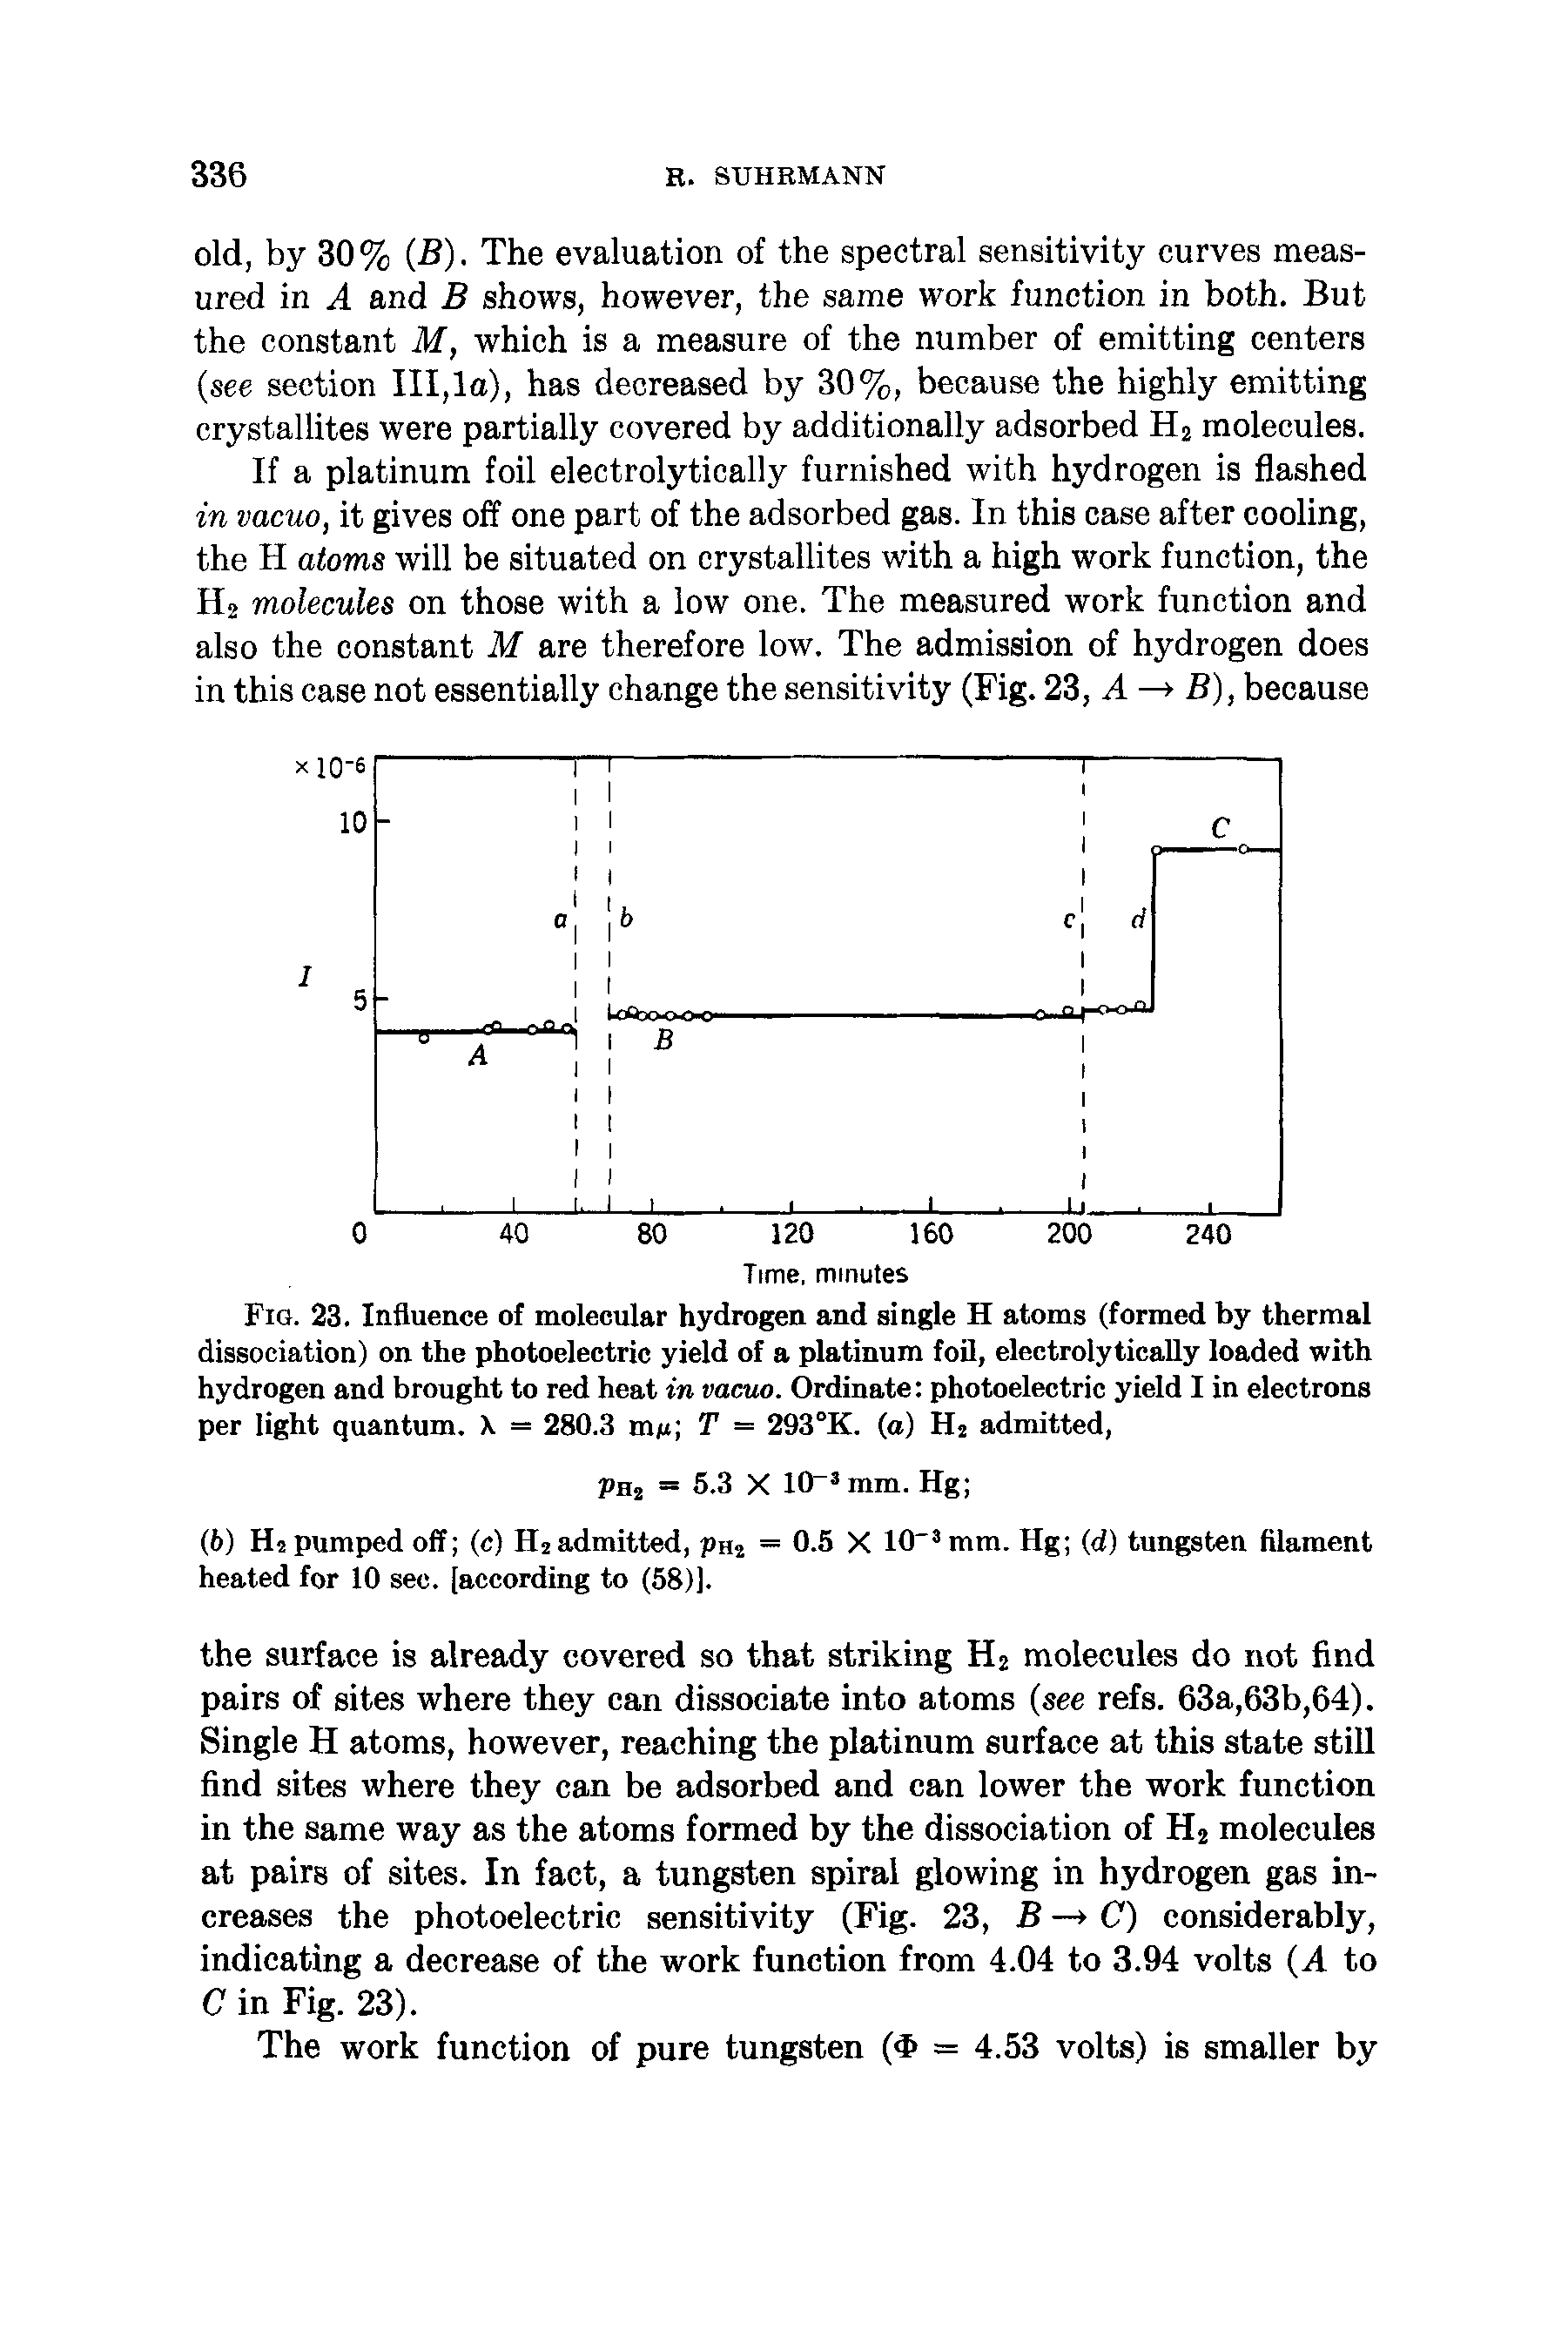 Fig. 23. Influence of molecular hydrogen and single H atoms (formed by thermal dissociation) on the photoelectric yield of a platinum foil, electrolytically loaded with hydrogen and brought to red heat in vacuo. Ordinate photoelectric yield I in electrons per light quantum. X = 280.3 mg T = 293°K. (a) H2 admitted,...